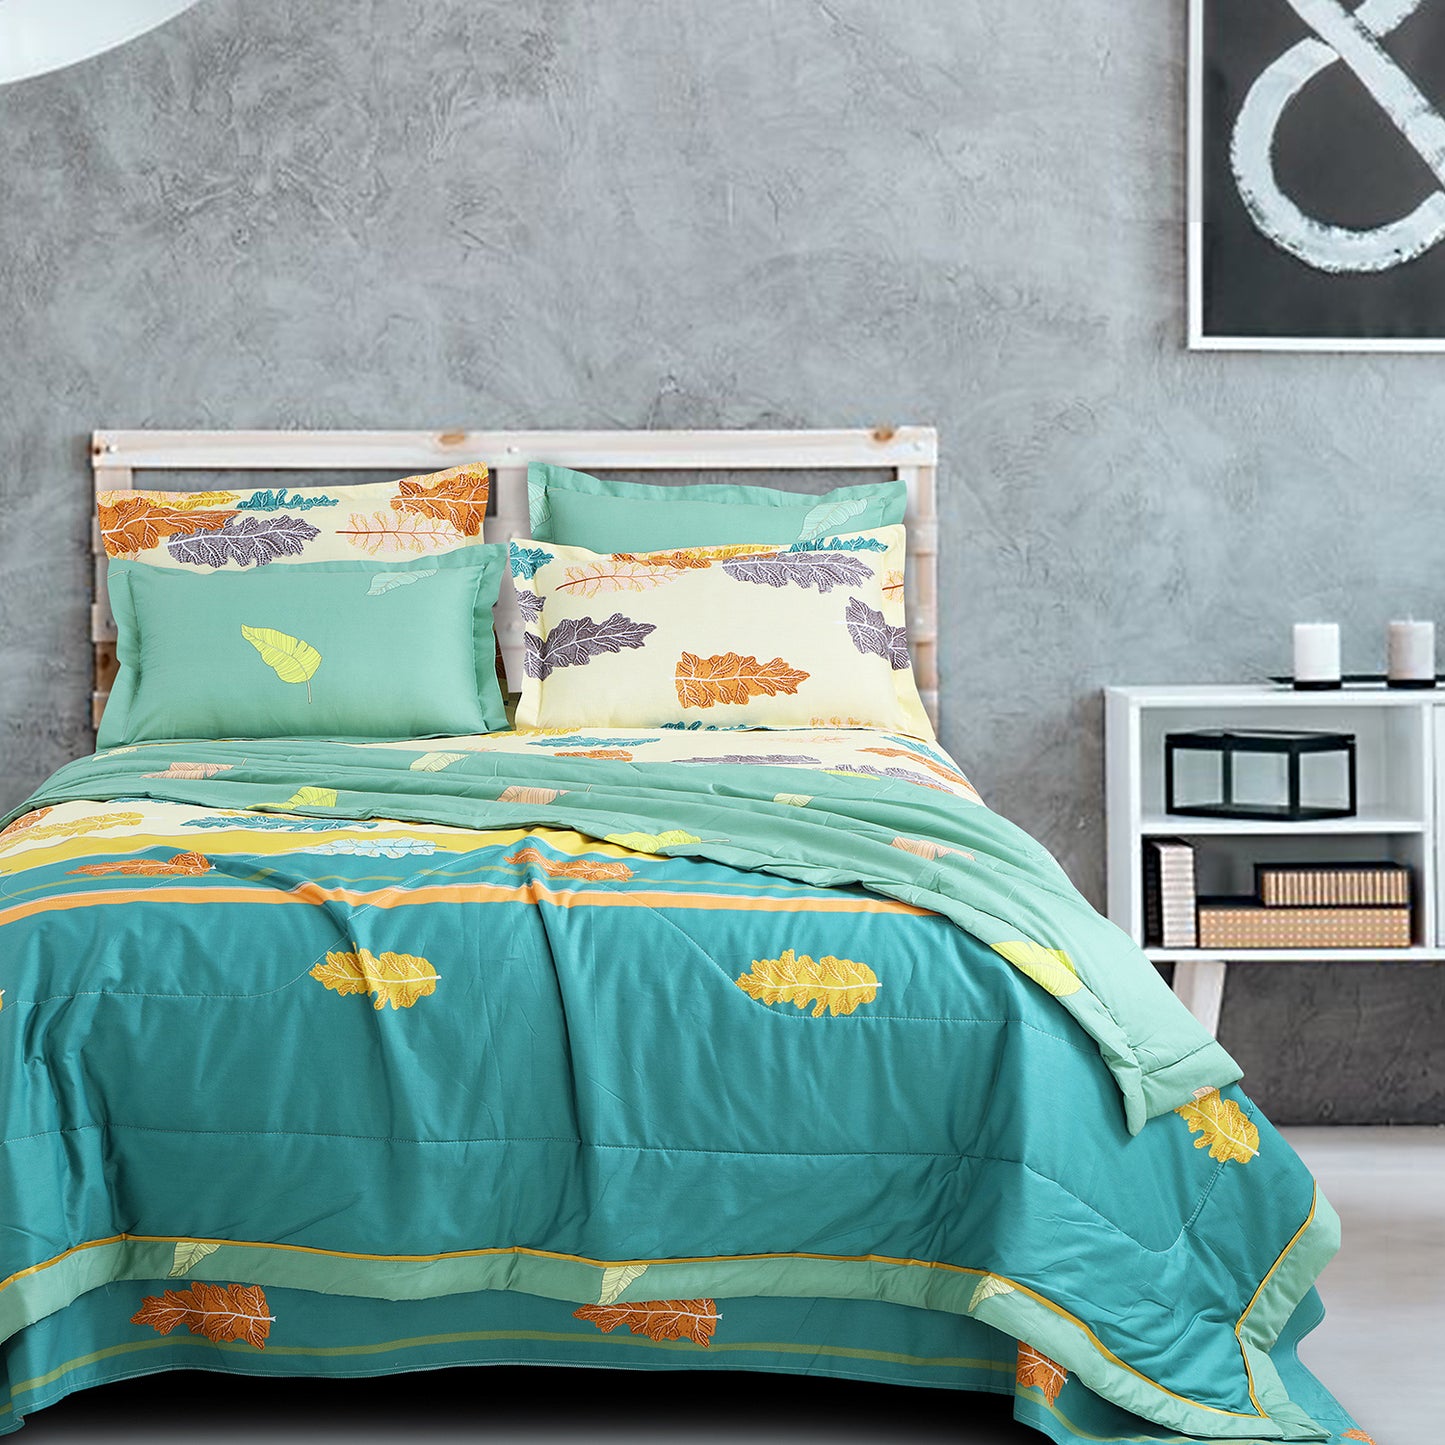 Fusion sage green and teal with floral print Bedding